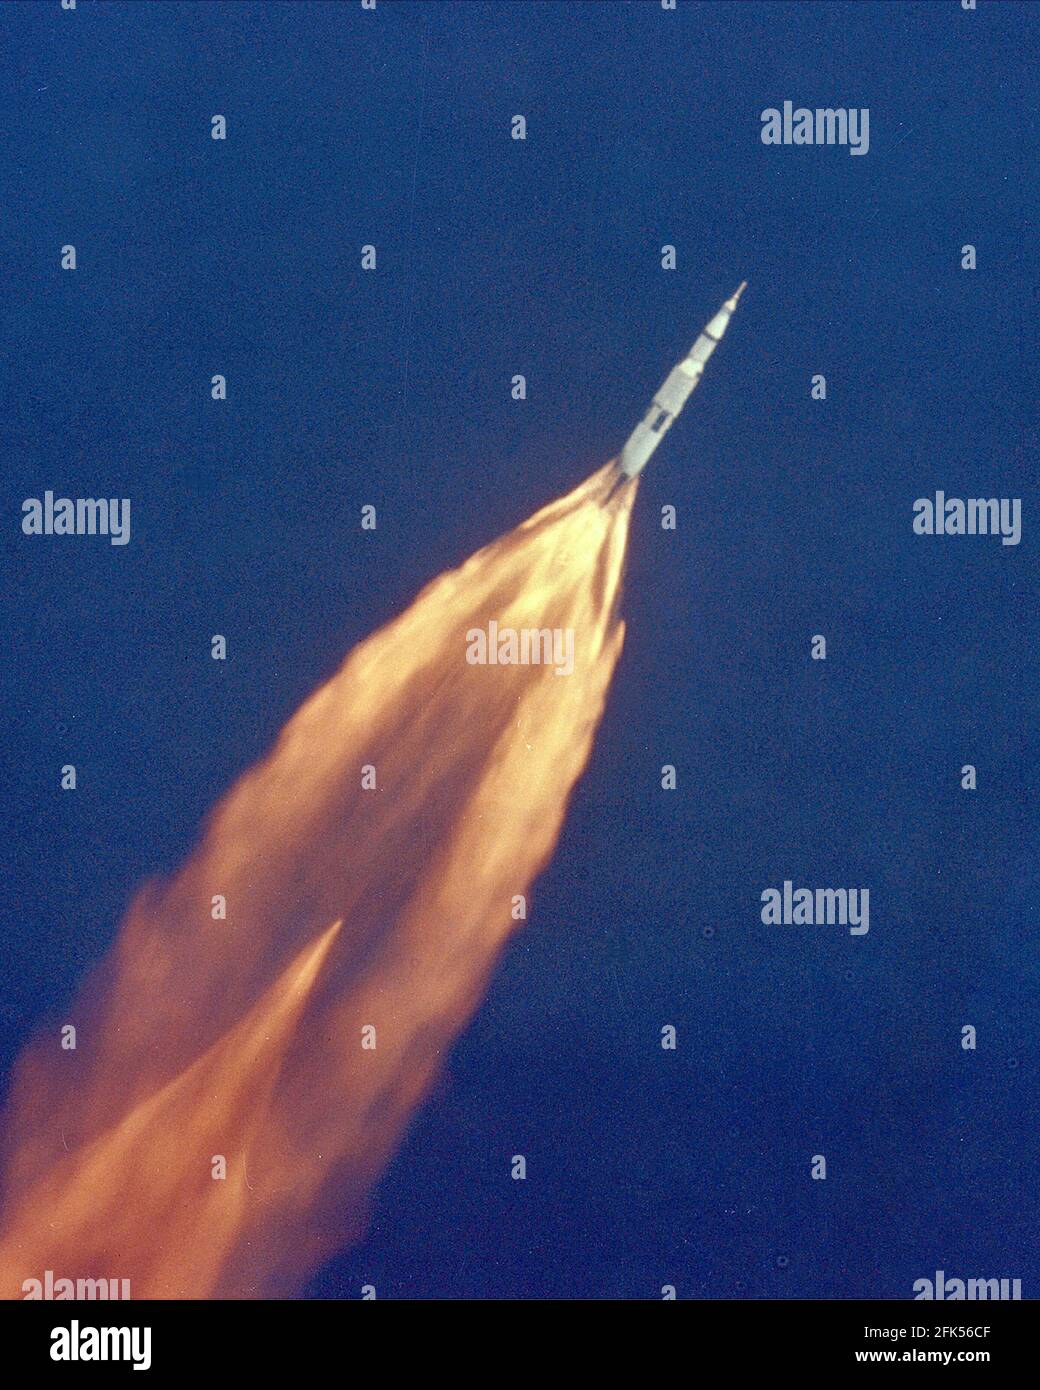 Cape Canaveral, FL - (FILE) -- The Apollo 11 Saturn V space vehicle climbs toward orbit after liftoff from Pad 39A at 9:32 a.m. EDT on Wednesday, July 16, 1969. In 2 1/2 minutes of powered flight, the S-IC booster lifts the vehicle to an altitude of about 39 miles some 55 miles downrange. This photo was taken with a 70mm telescopic camera mounted in an Air Force EC-135N plane. Onboard are astronauts Neil A. Armstrong, Michael Collins and Edwin E. Aldrin, Jr.Credit: NASA via CNP. /MediaPunch Stock Photo